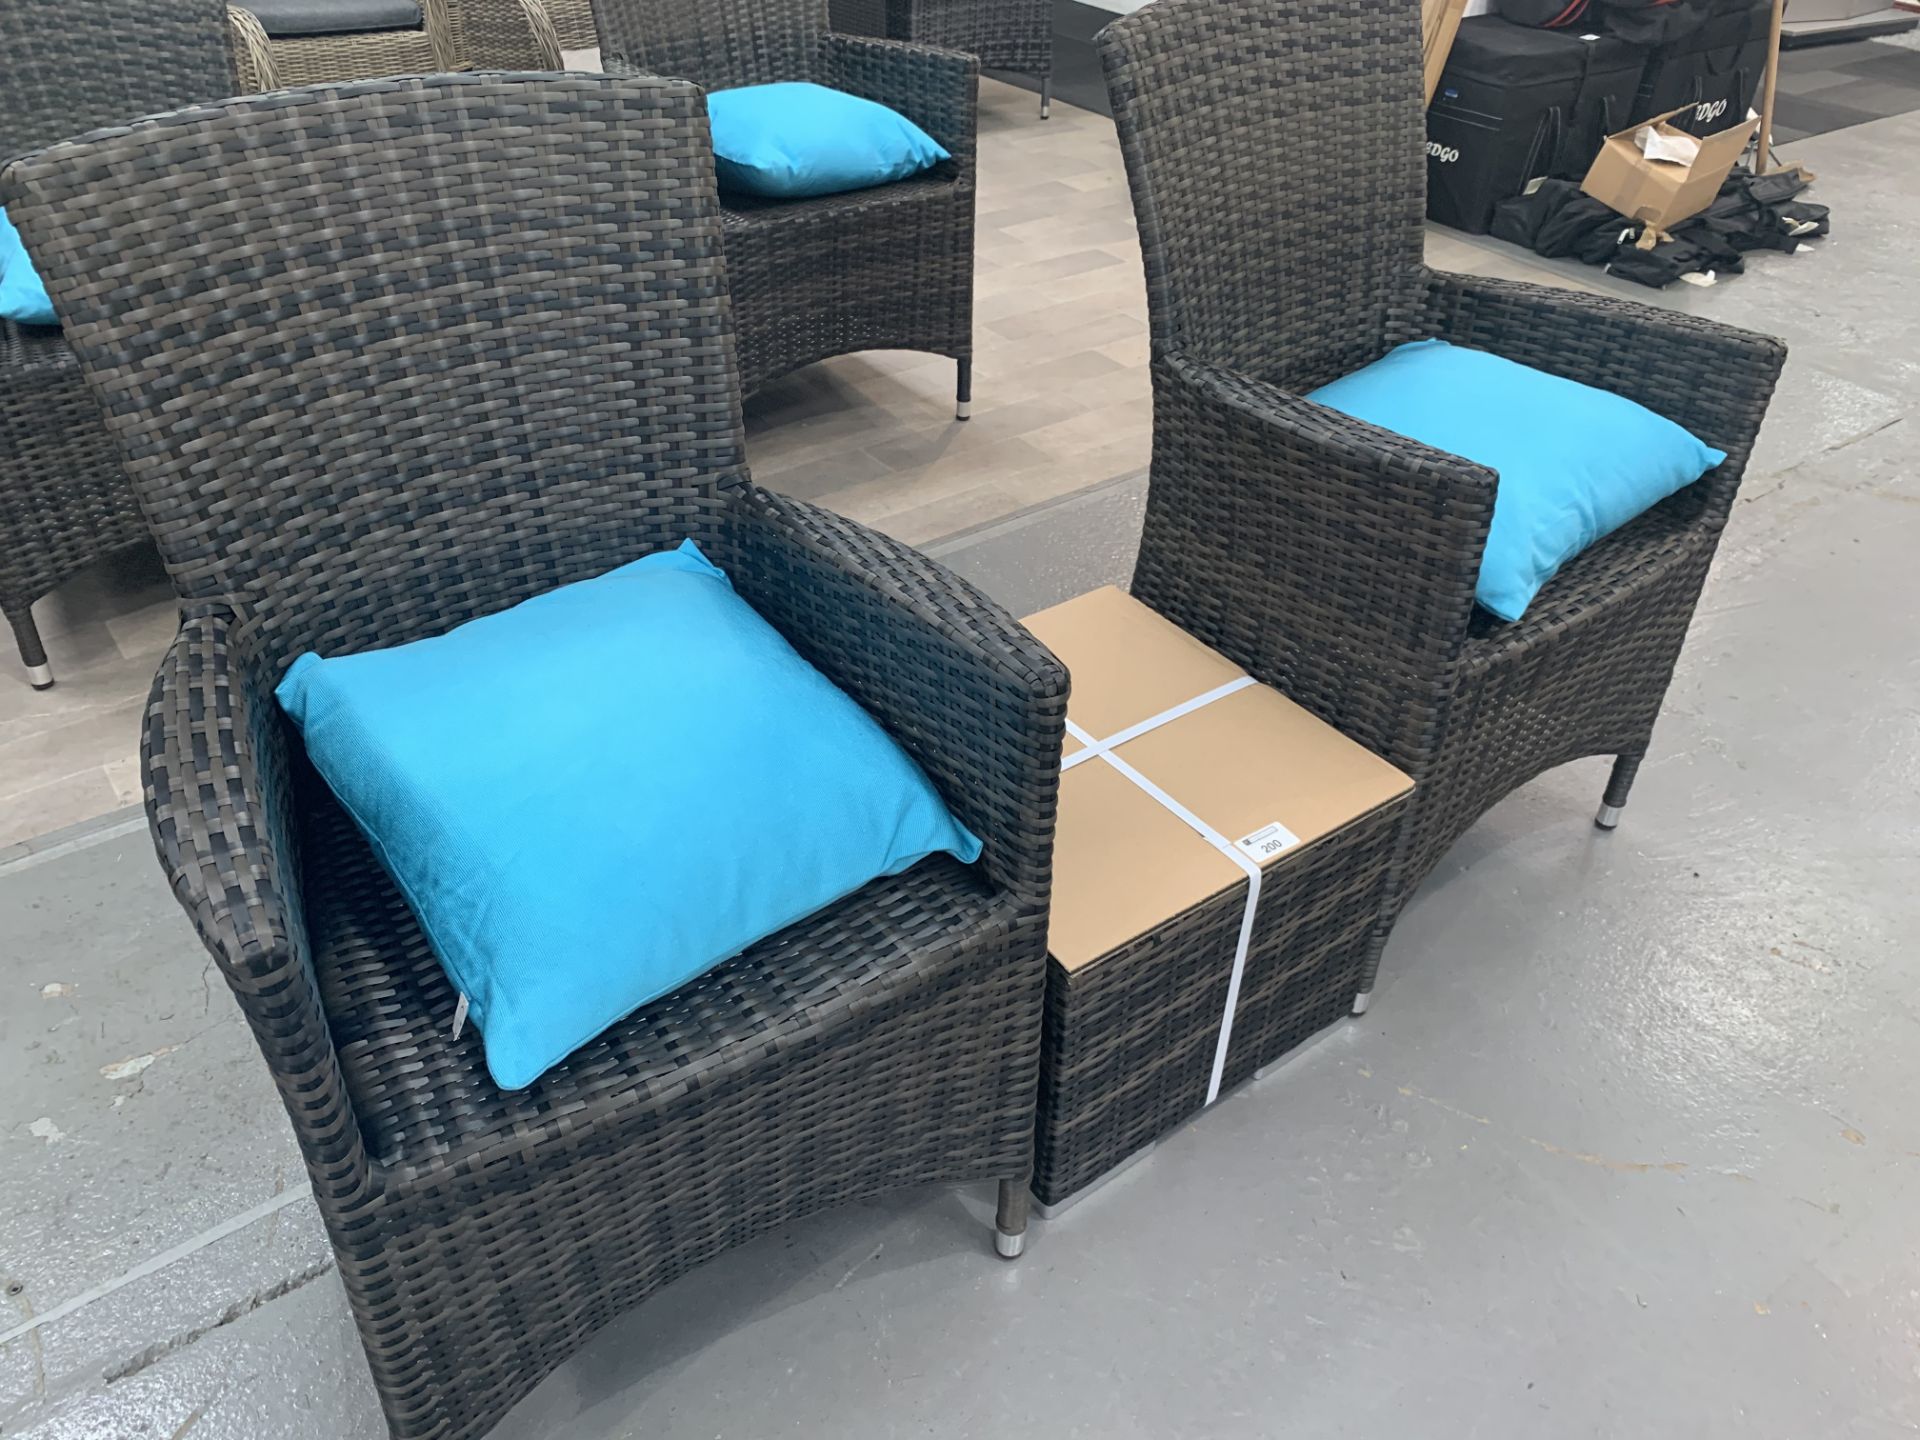 A Pair of Maze Rattan Cushion Arm chairs with matching glass top table - Image 2 of 3